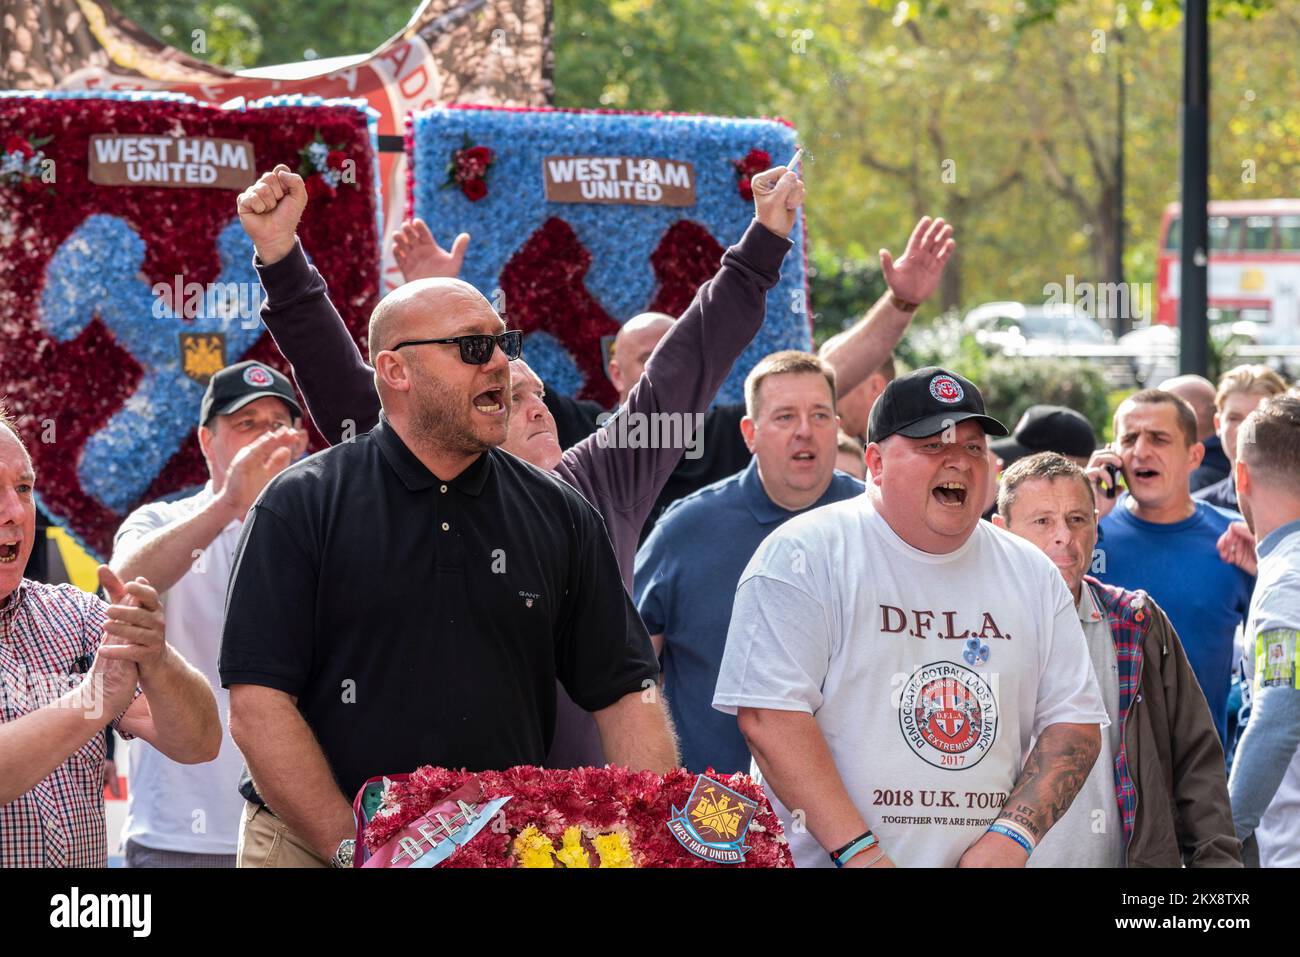 Democratic Football Lads Alliance, DFLA, marched towards Parliament, London, UK, in a protest demonstration against terrorism. West Ham supporters Stock Photo